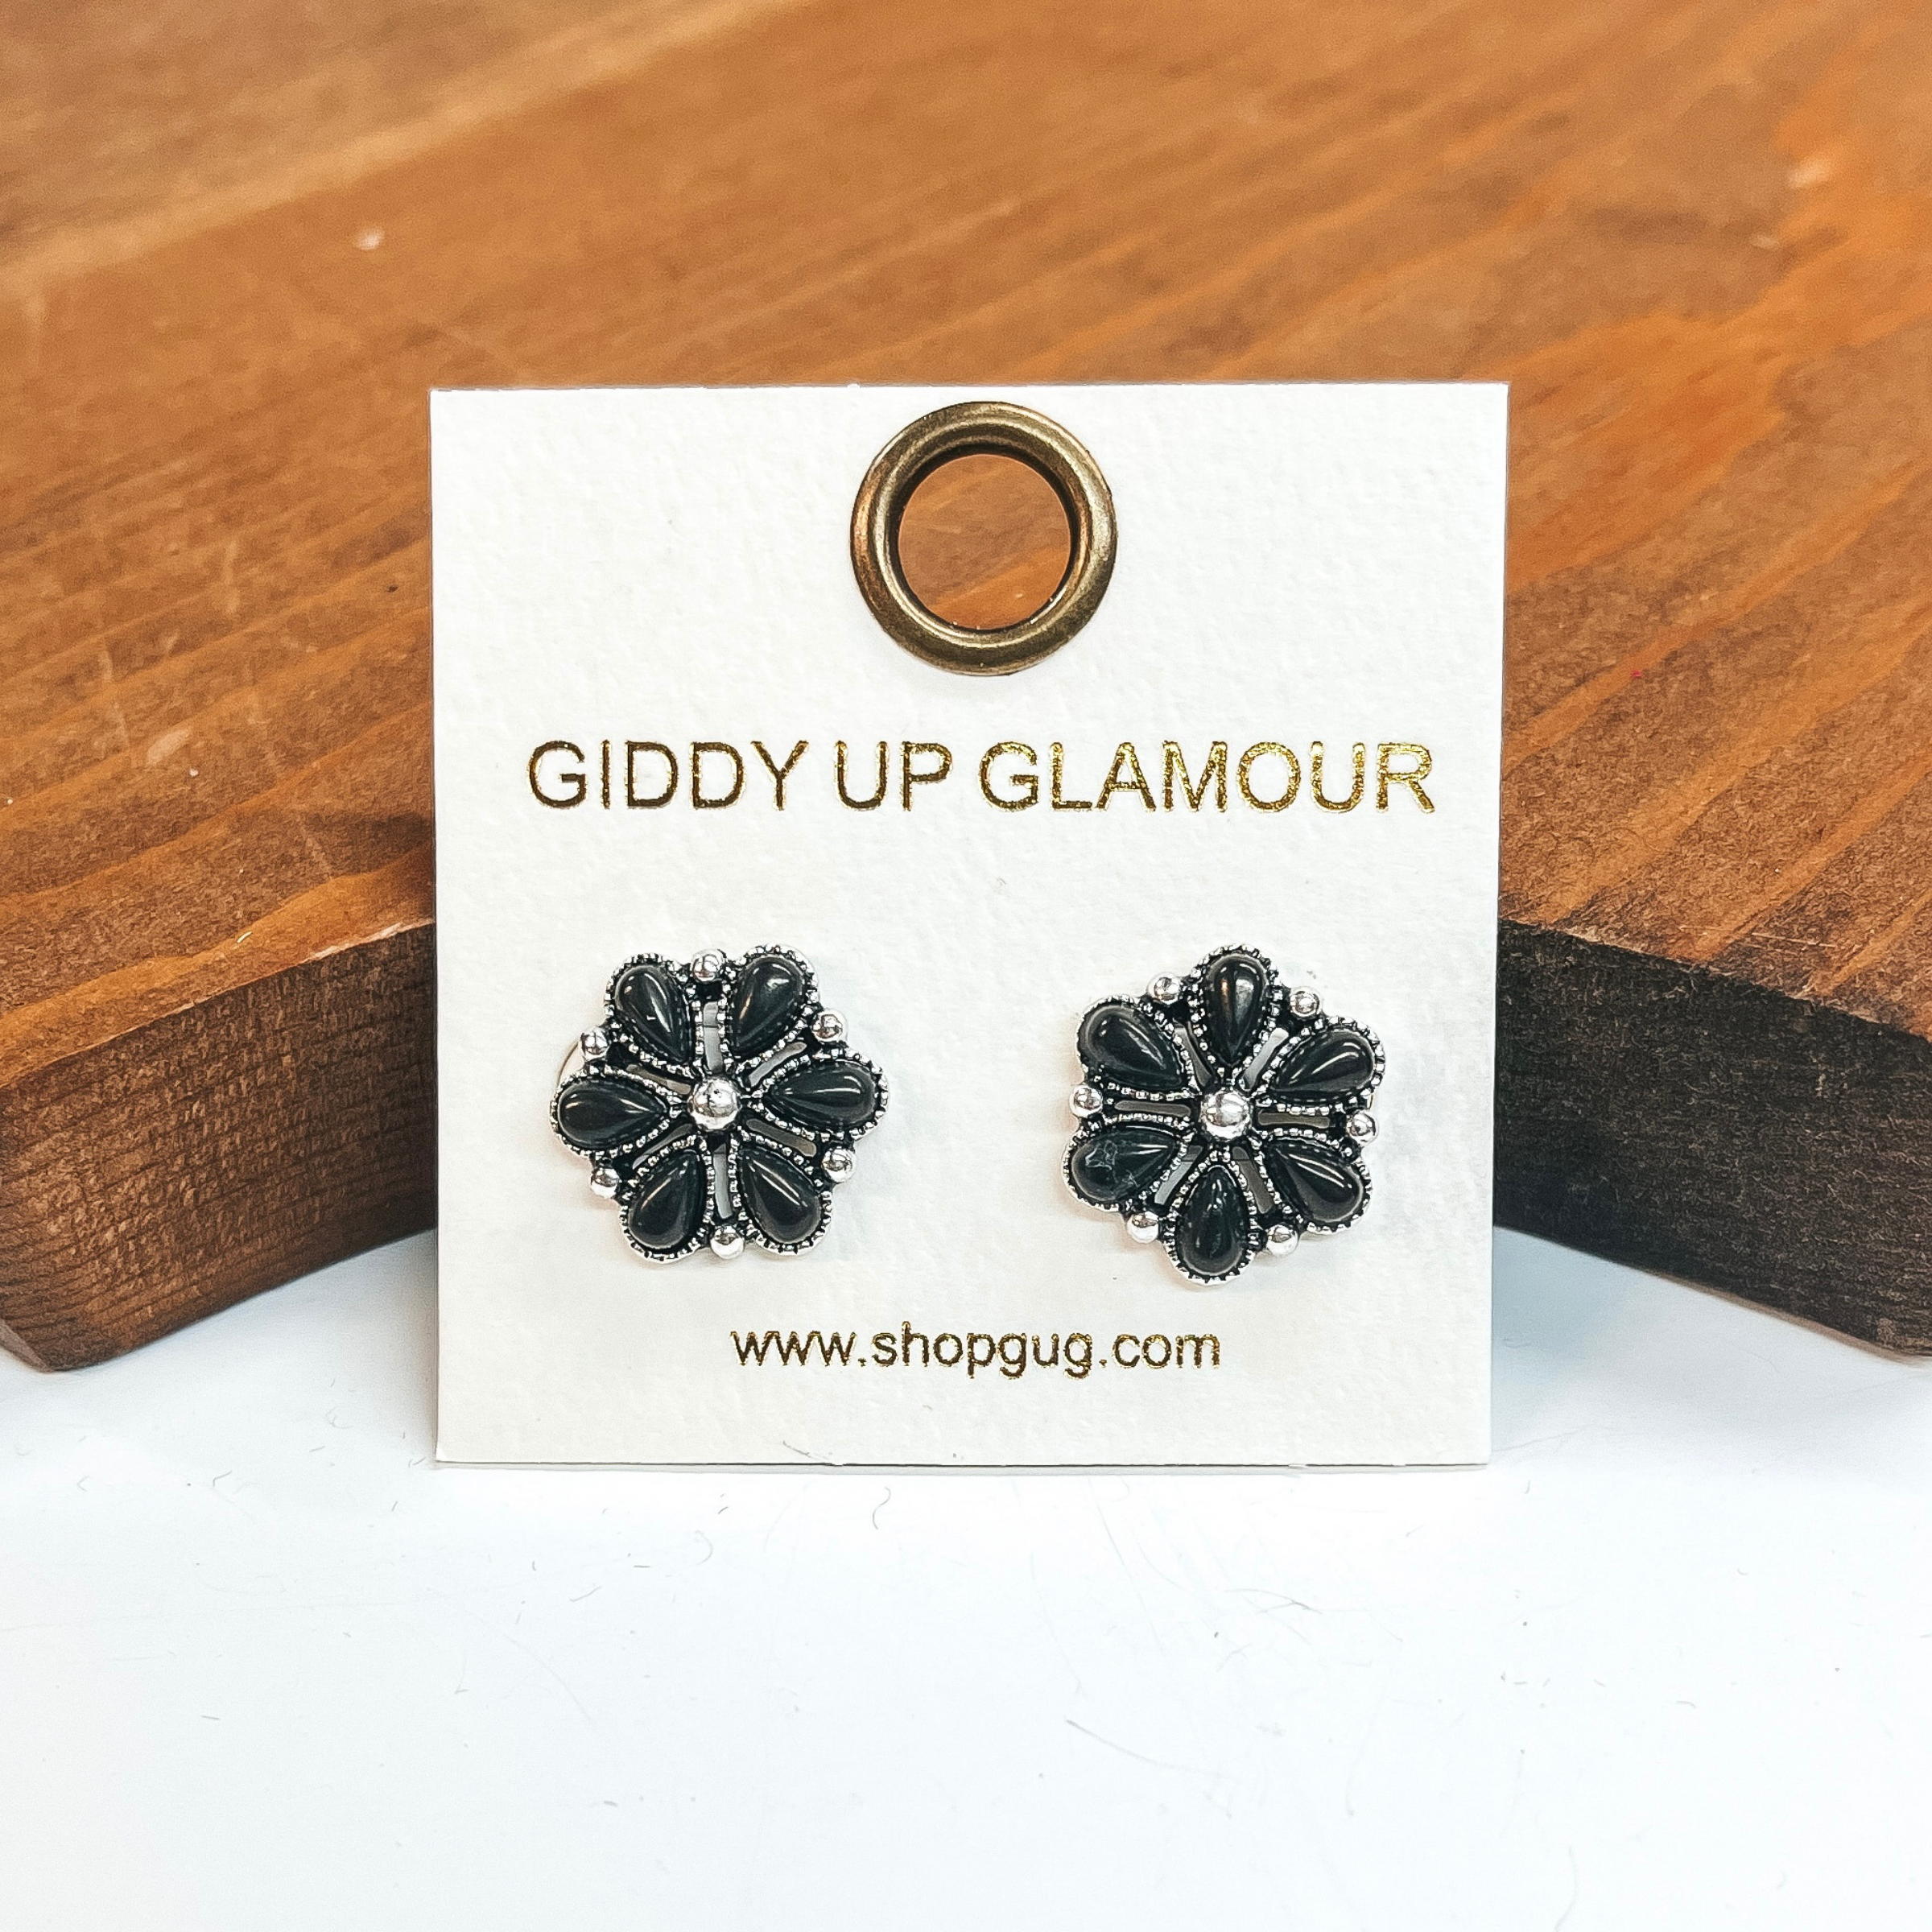 Silver flower earrings that include black stones.  These earrings are taken on a white background and leaned up against a brown block.